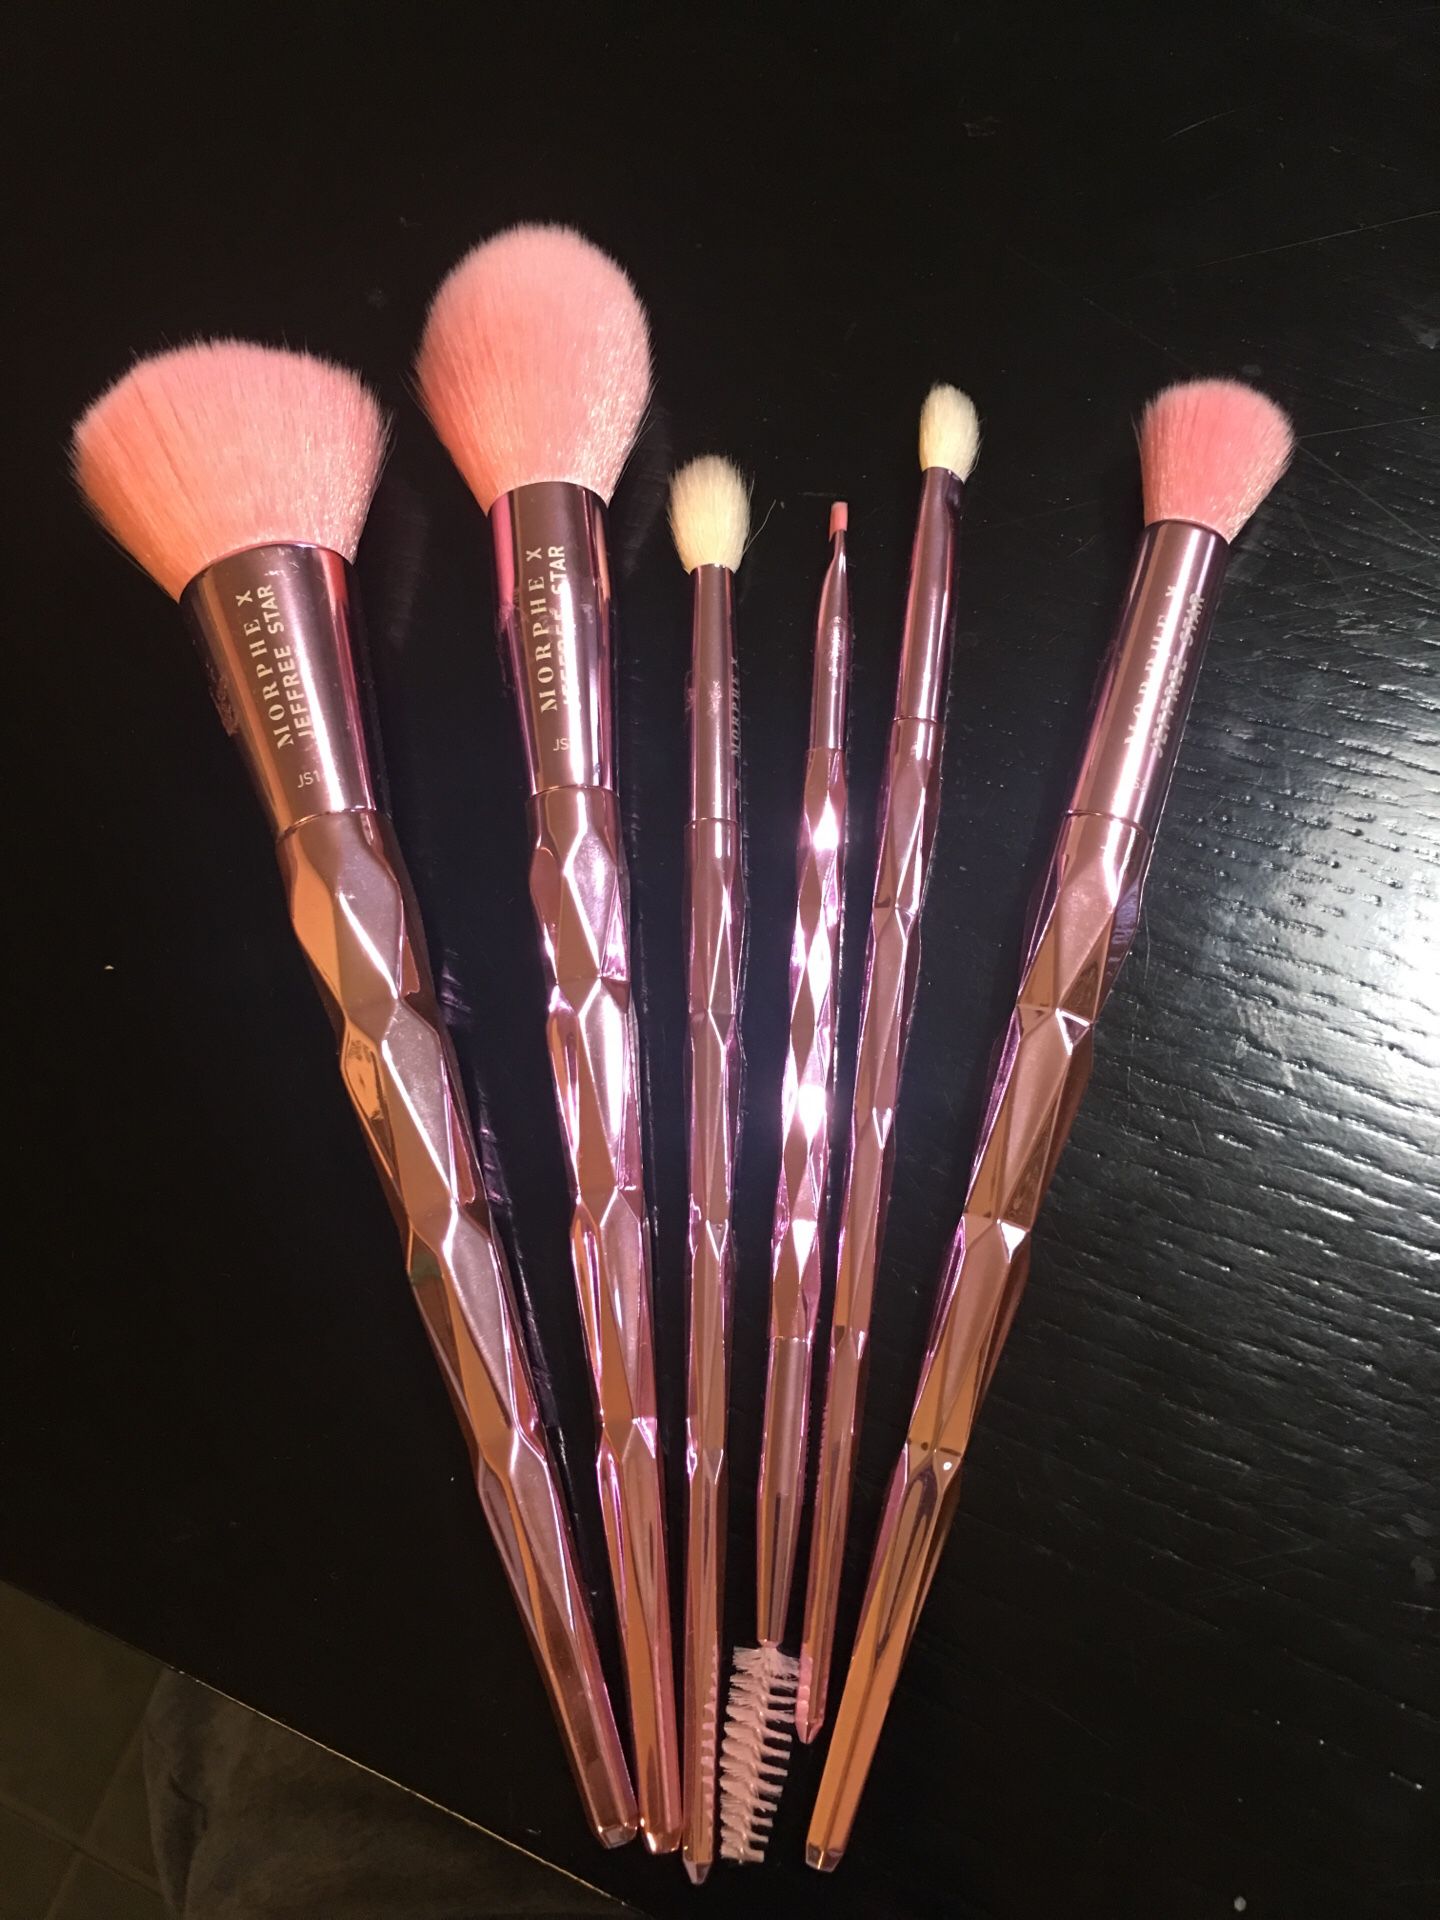 Morphe and Jeffrey star makeup brushes never used